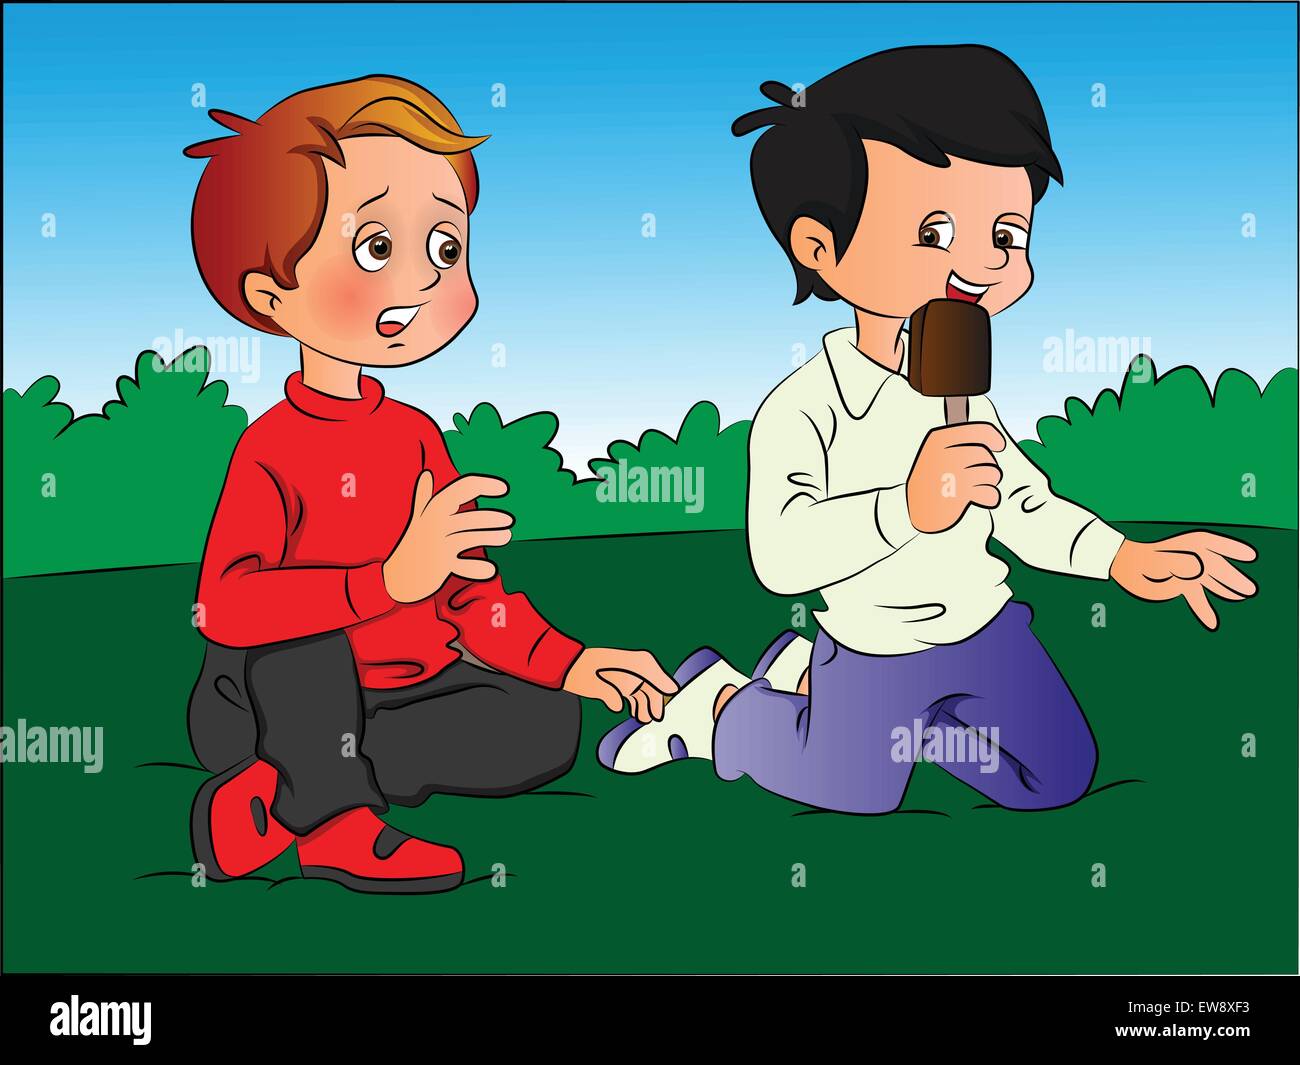 Vector illustration of a boy teasing his friend for ice cream. Stock Vector